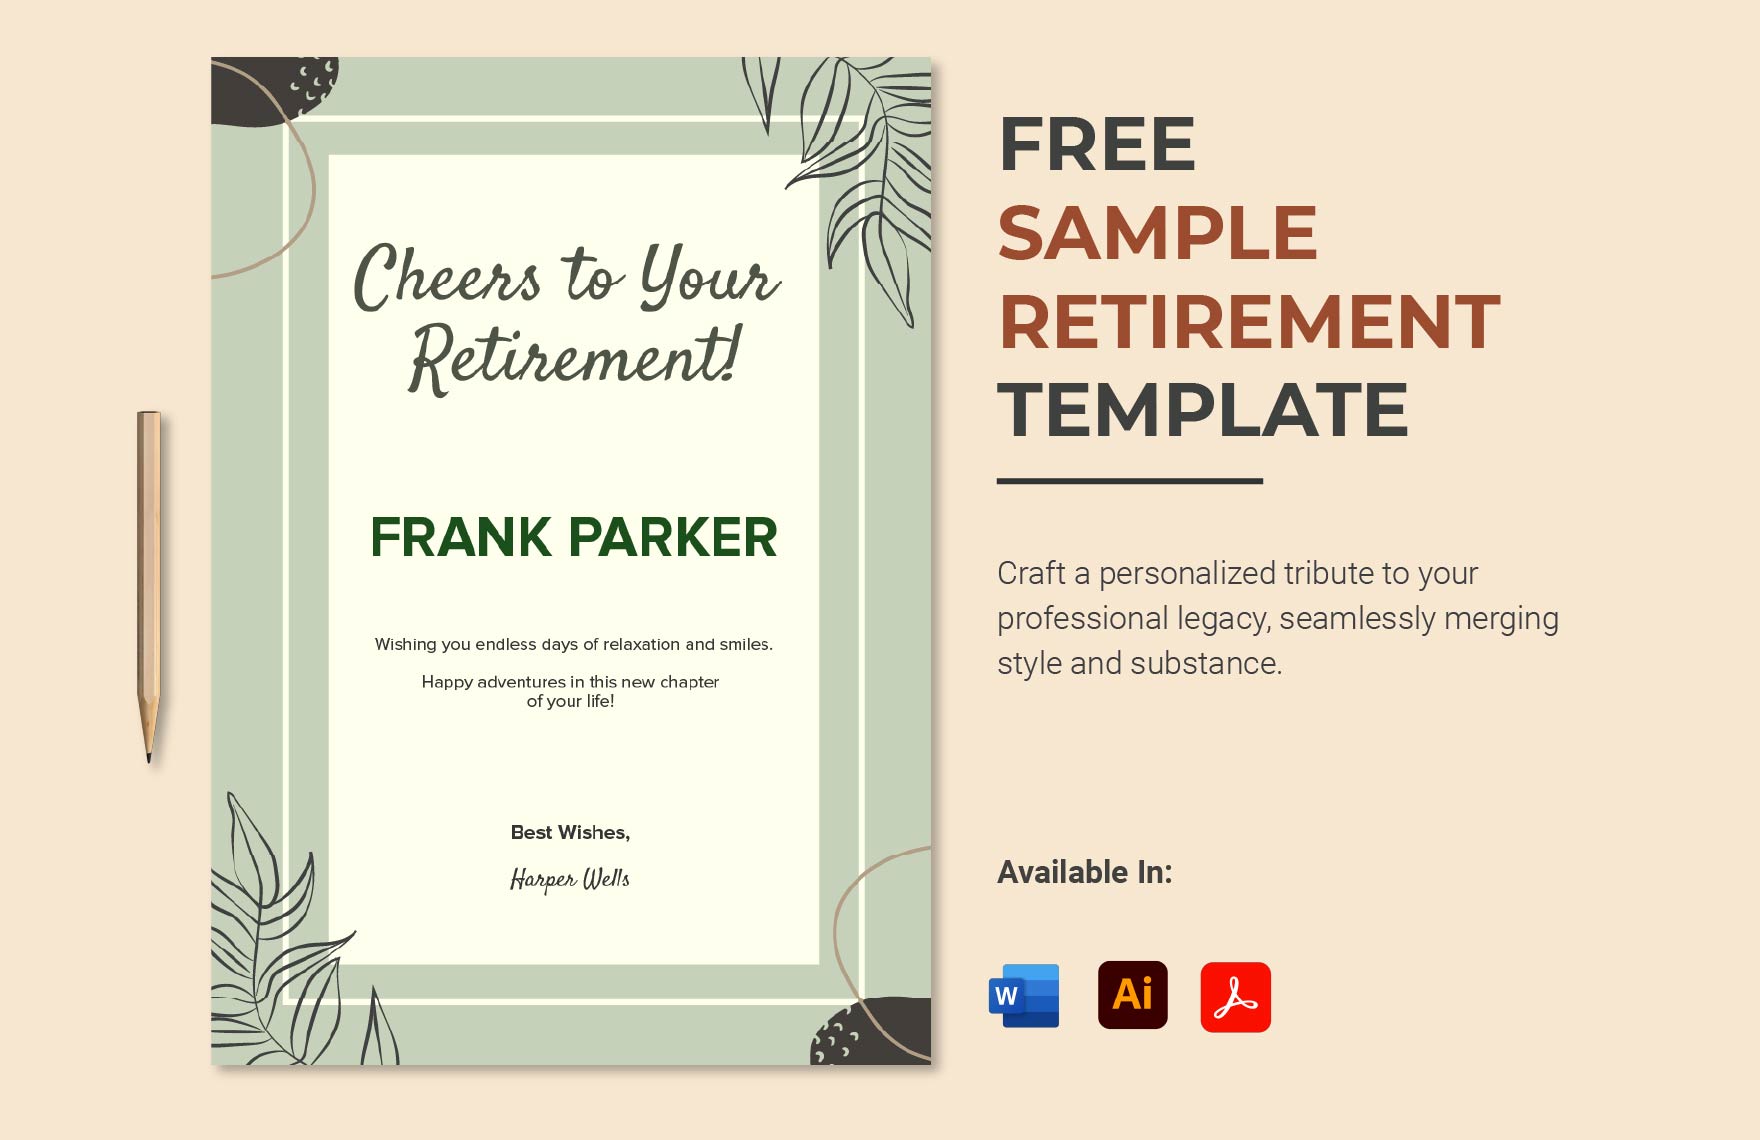 Free and customizable retirement templates